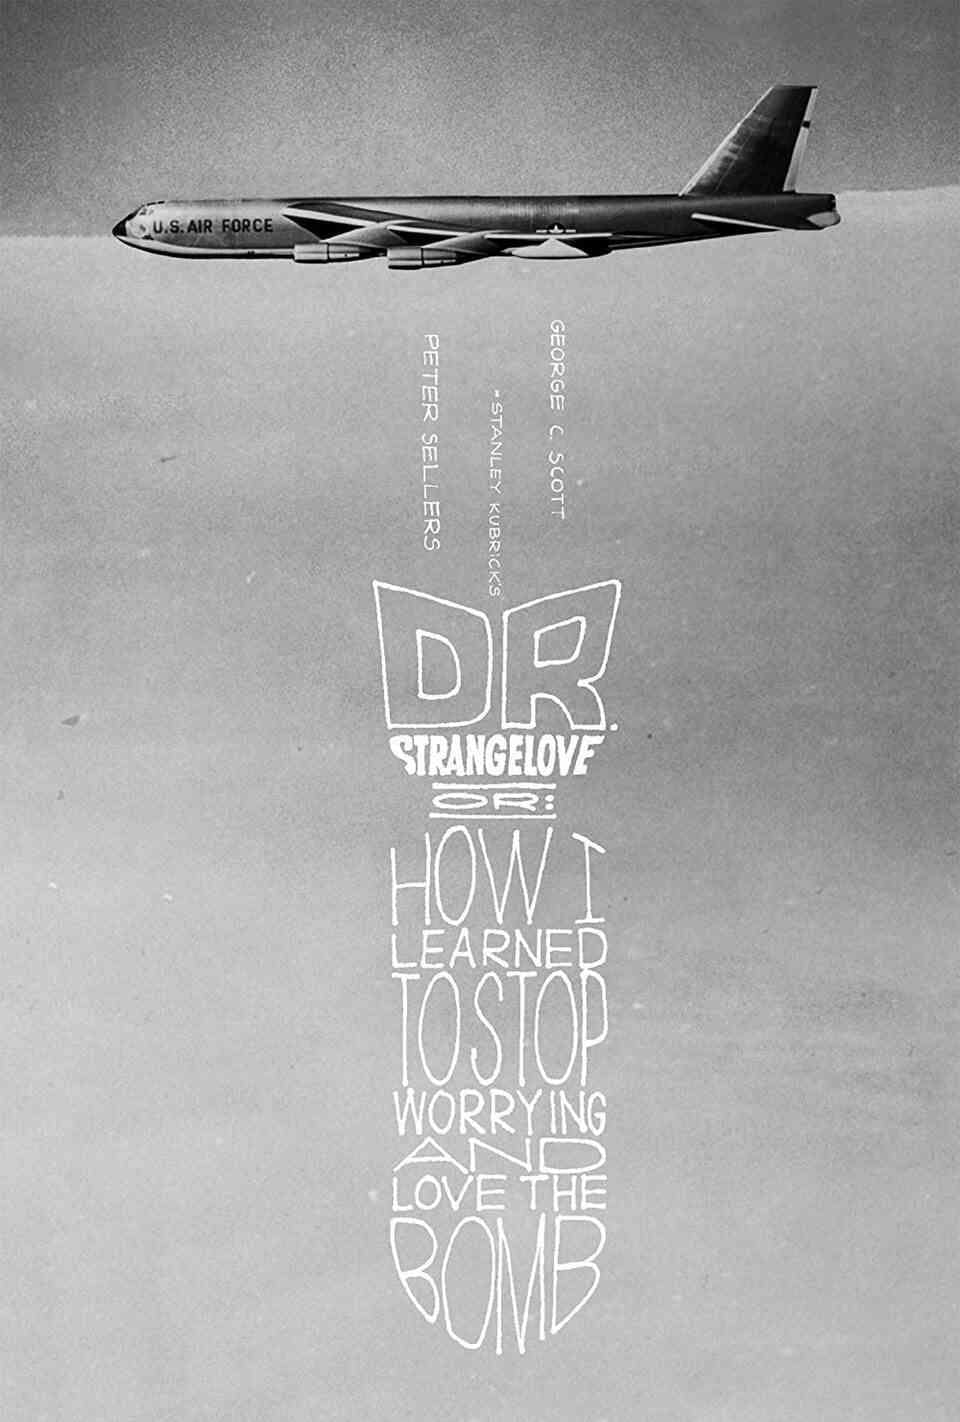 Read How I Learned to Stop Worrying and Love the Bomb screenplay (poster)